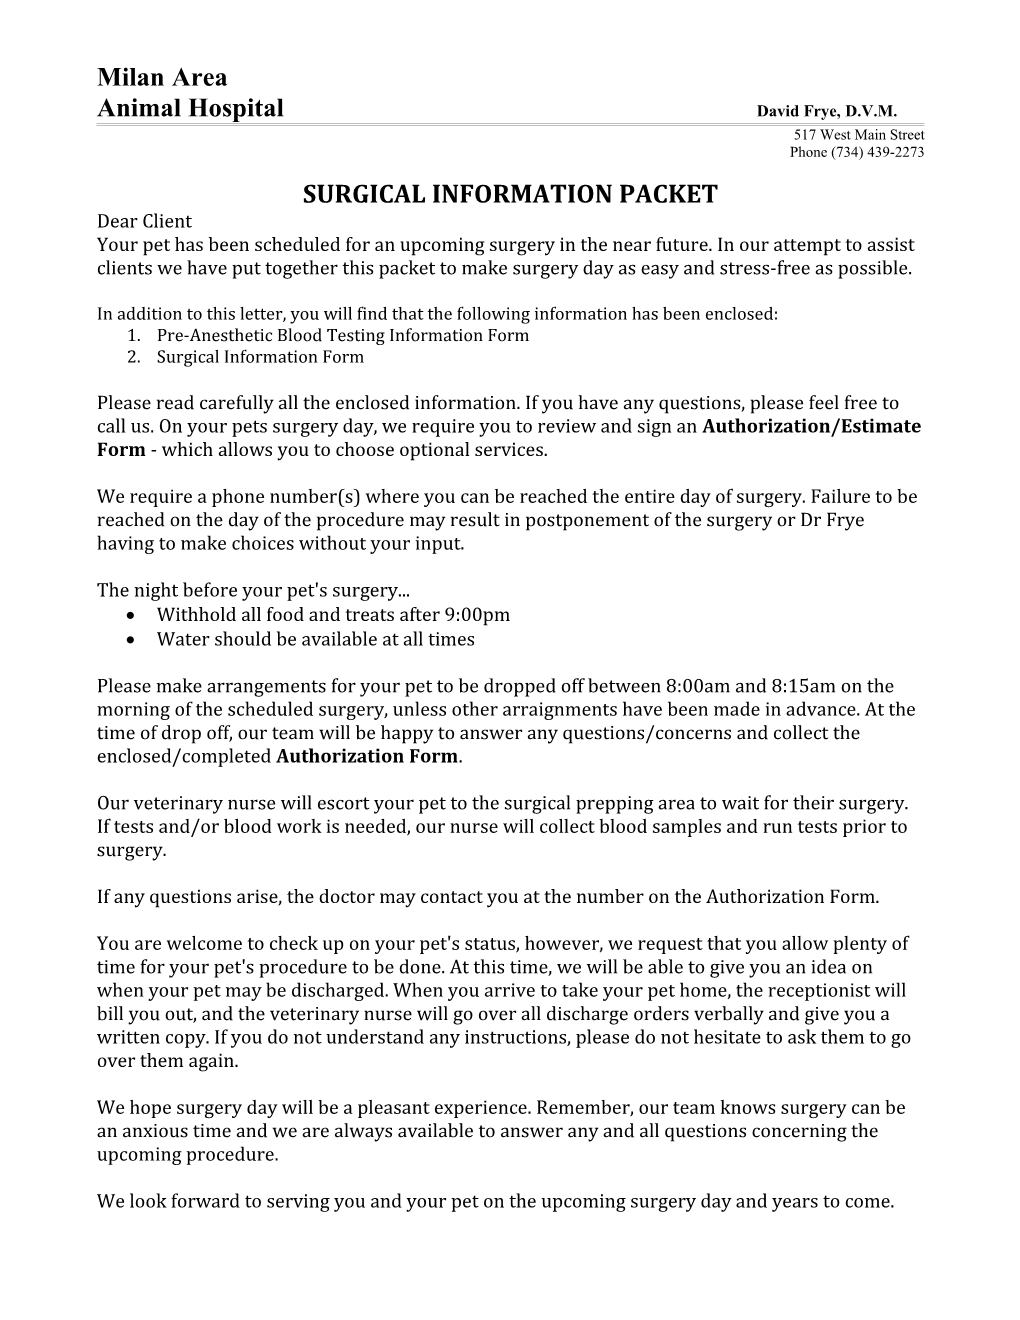 Surgical Information Packet